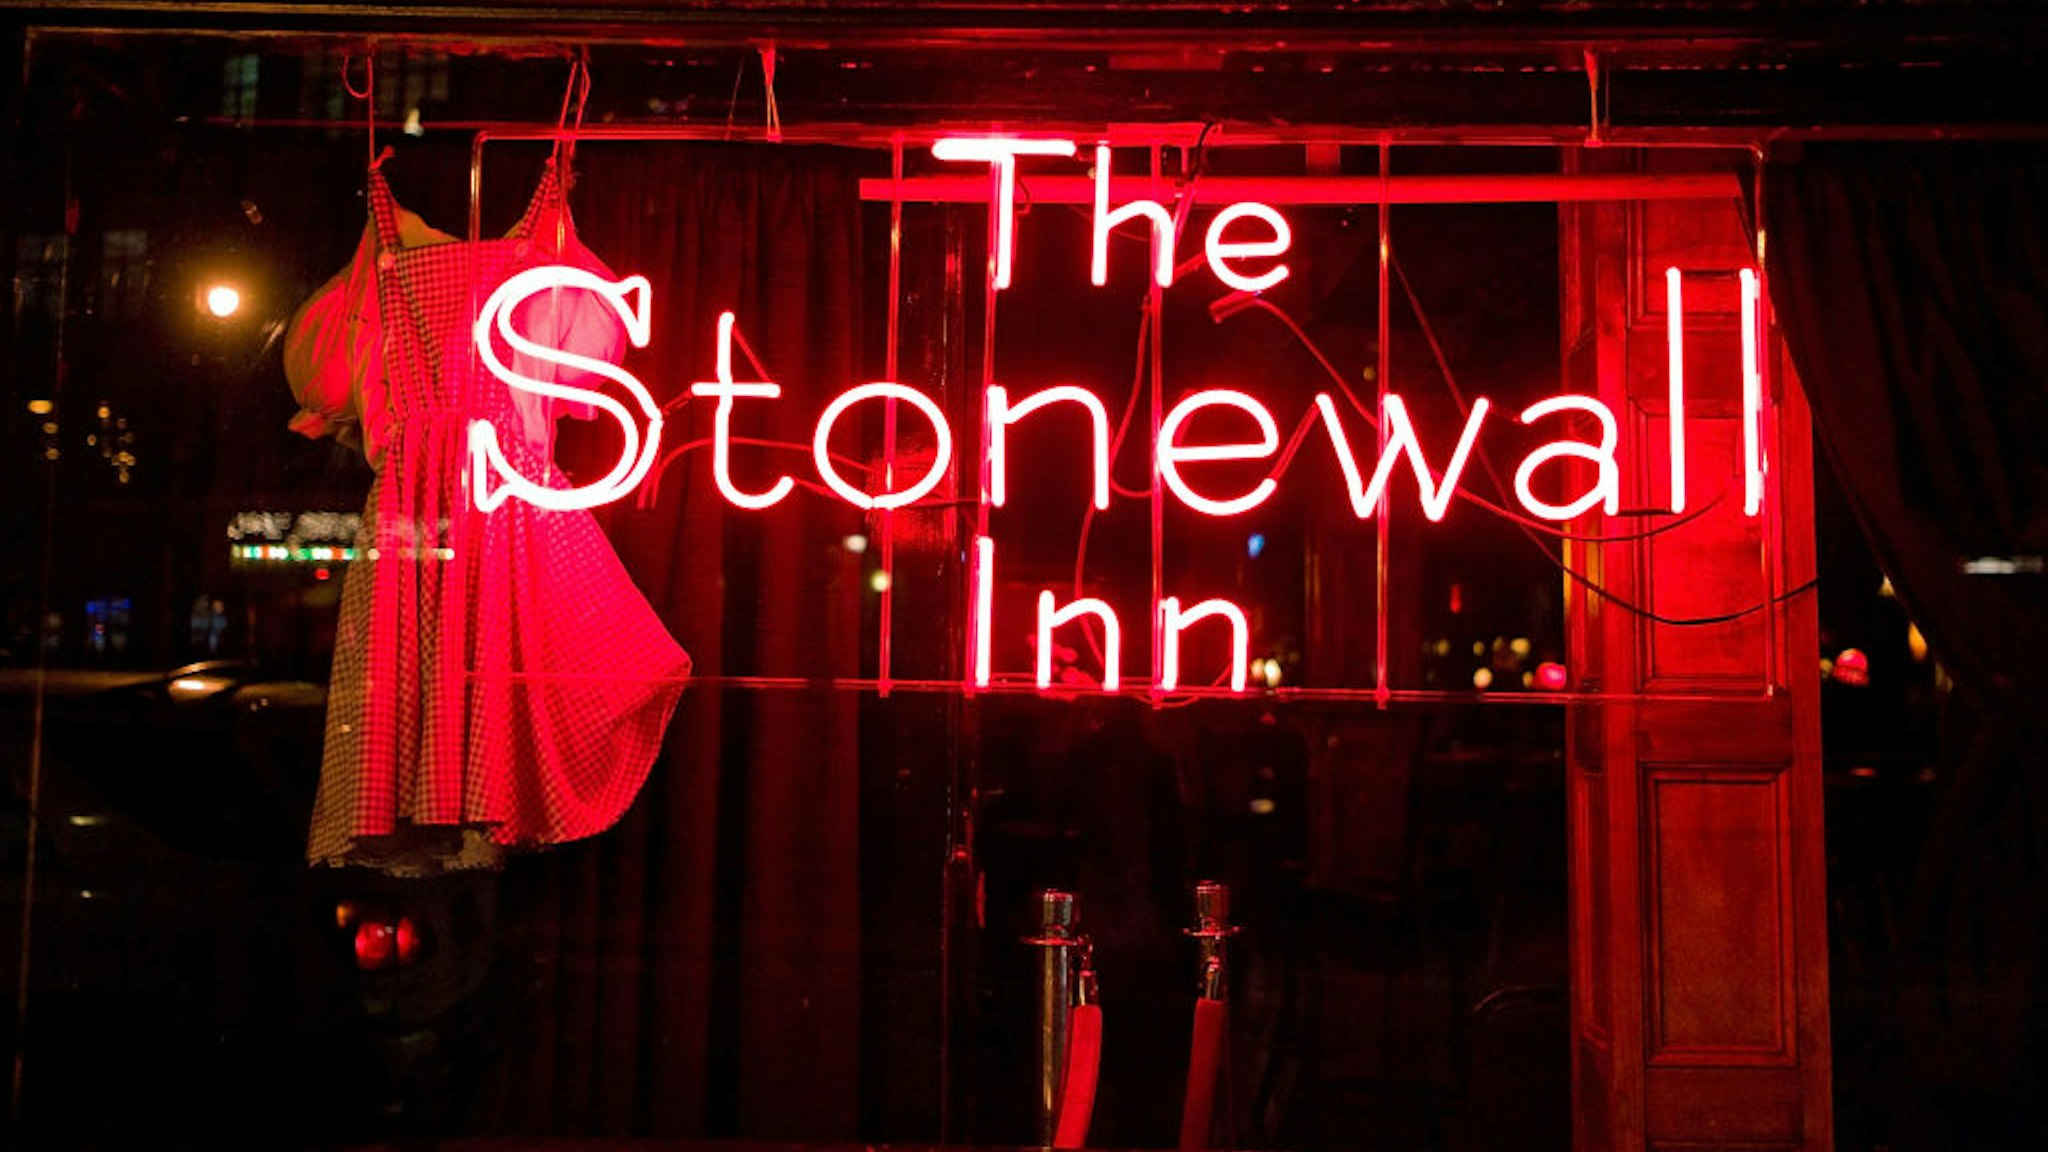 NEW YORK, NY - MARCH 02: A general view of the exterior of the Stonewall Inn on March 2, 2011 in New York City. (Photo by Ben Hider/Getty Images)